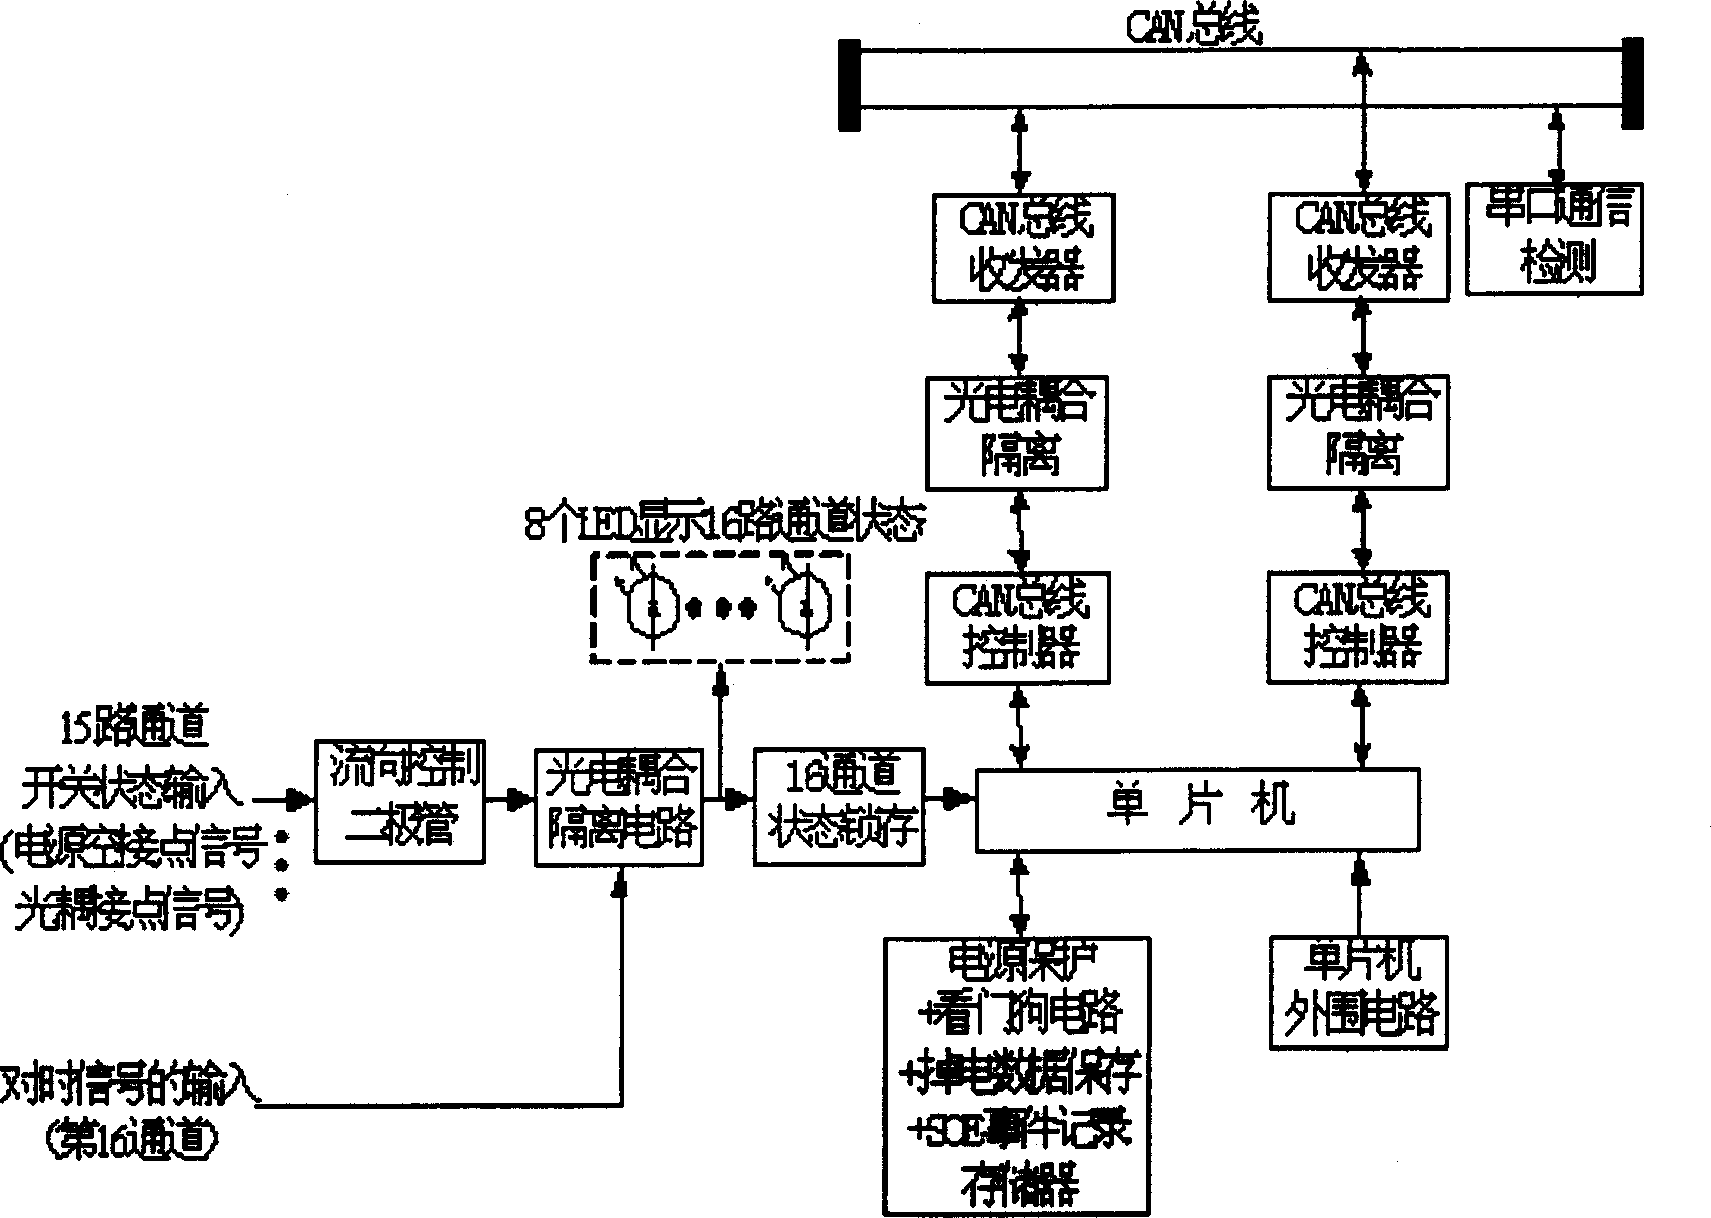 Multi-event sequential recording and testing system